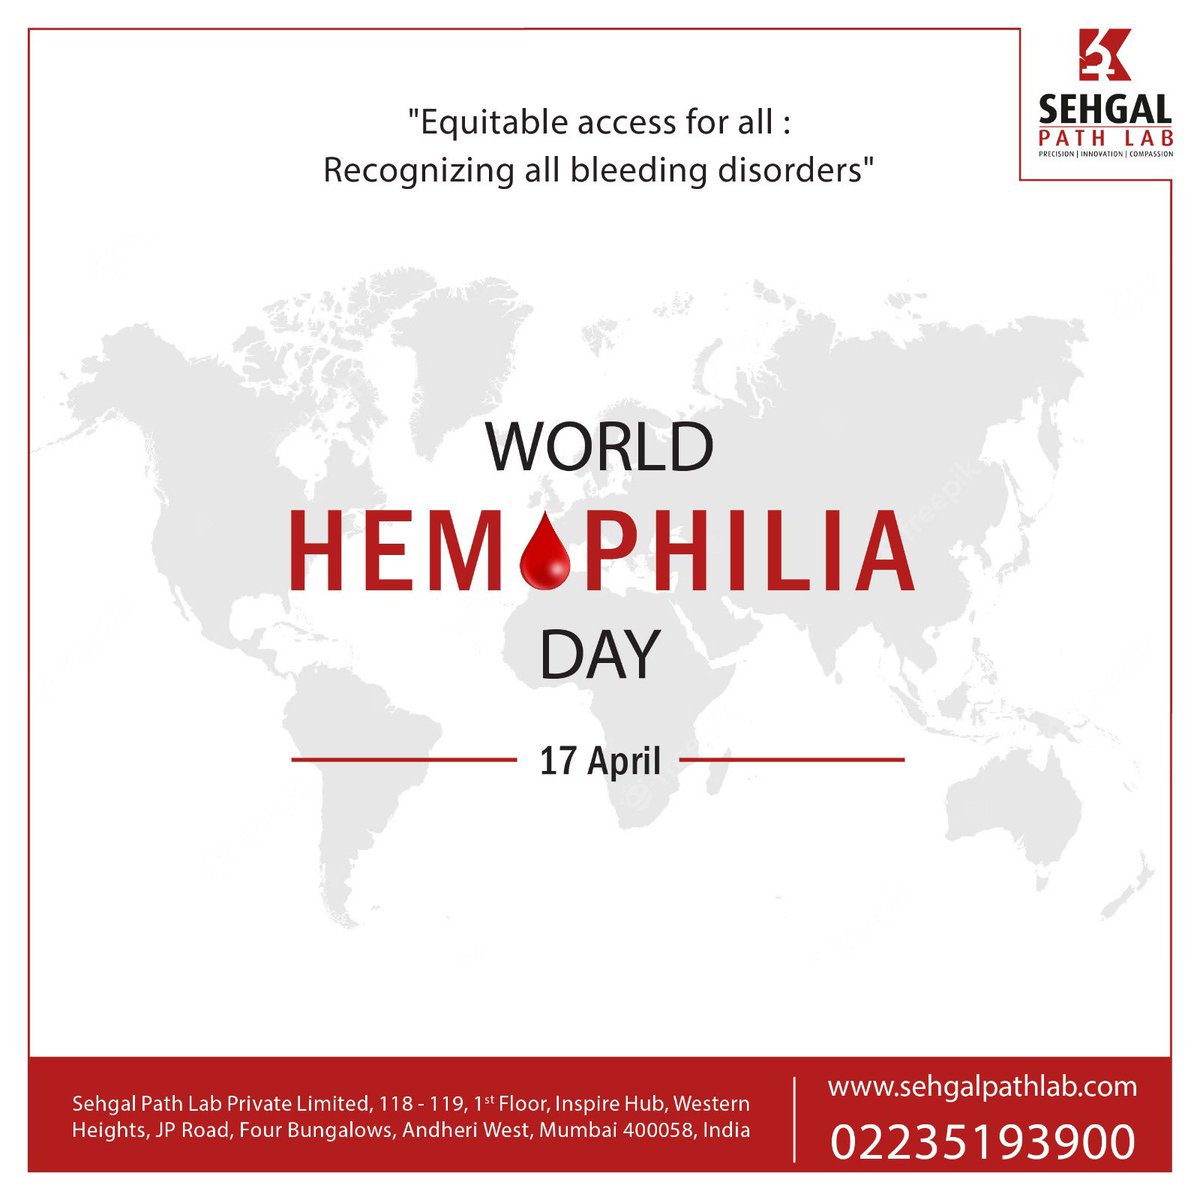 Spread awareness about Haemophilia  “Equitable access for all: recognizing all bleeding disorders' #worldhemophiliaday #hemophilia #hemophiliaawareness #hemophiliaday #blood #health #wellness #healthyliving #accessforall #sehgwlpathlab